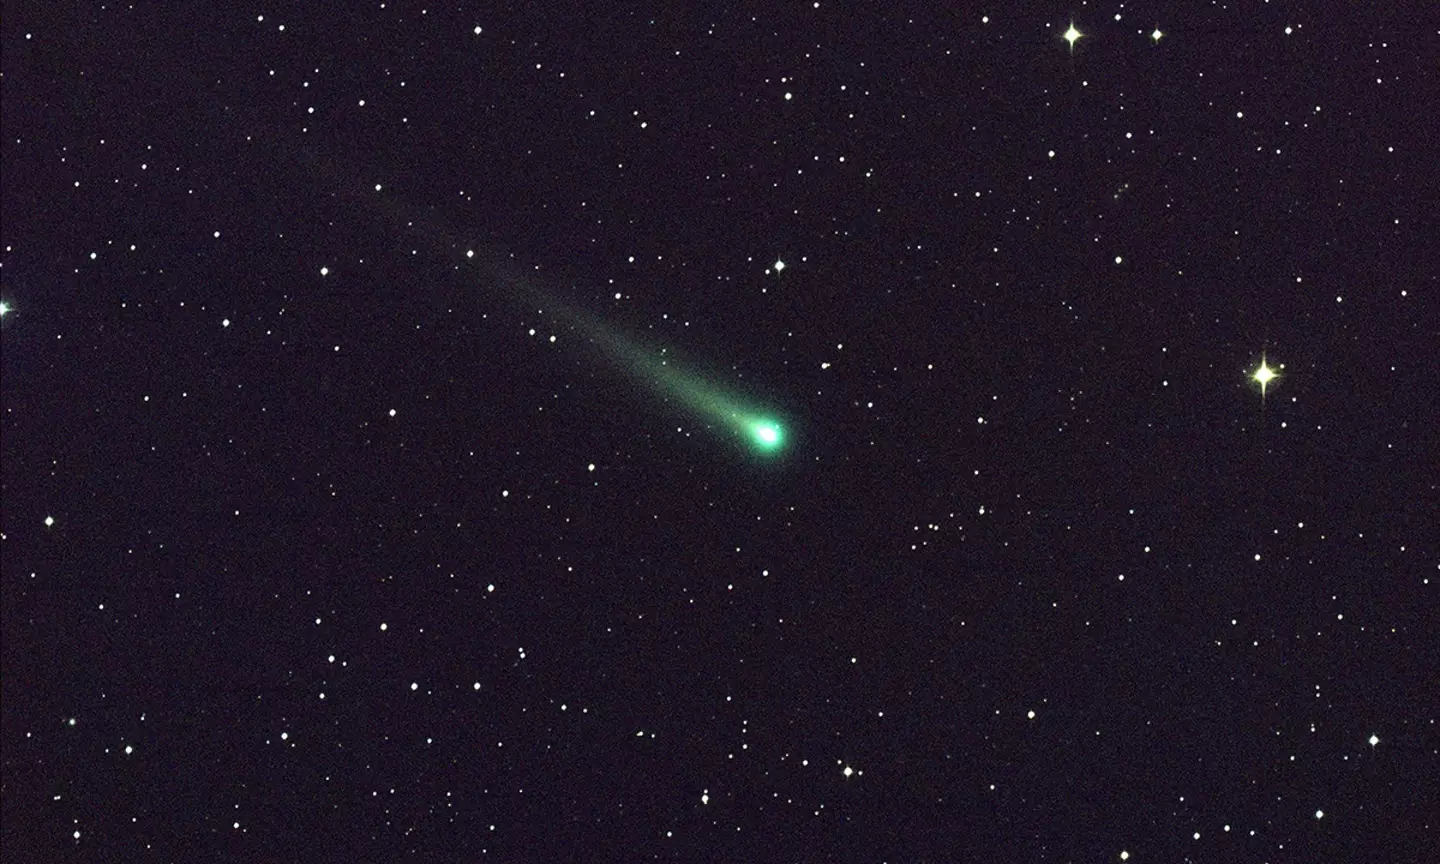 A green-tailed comet.